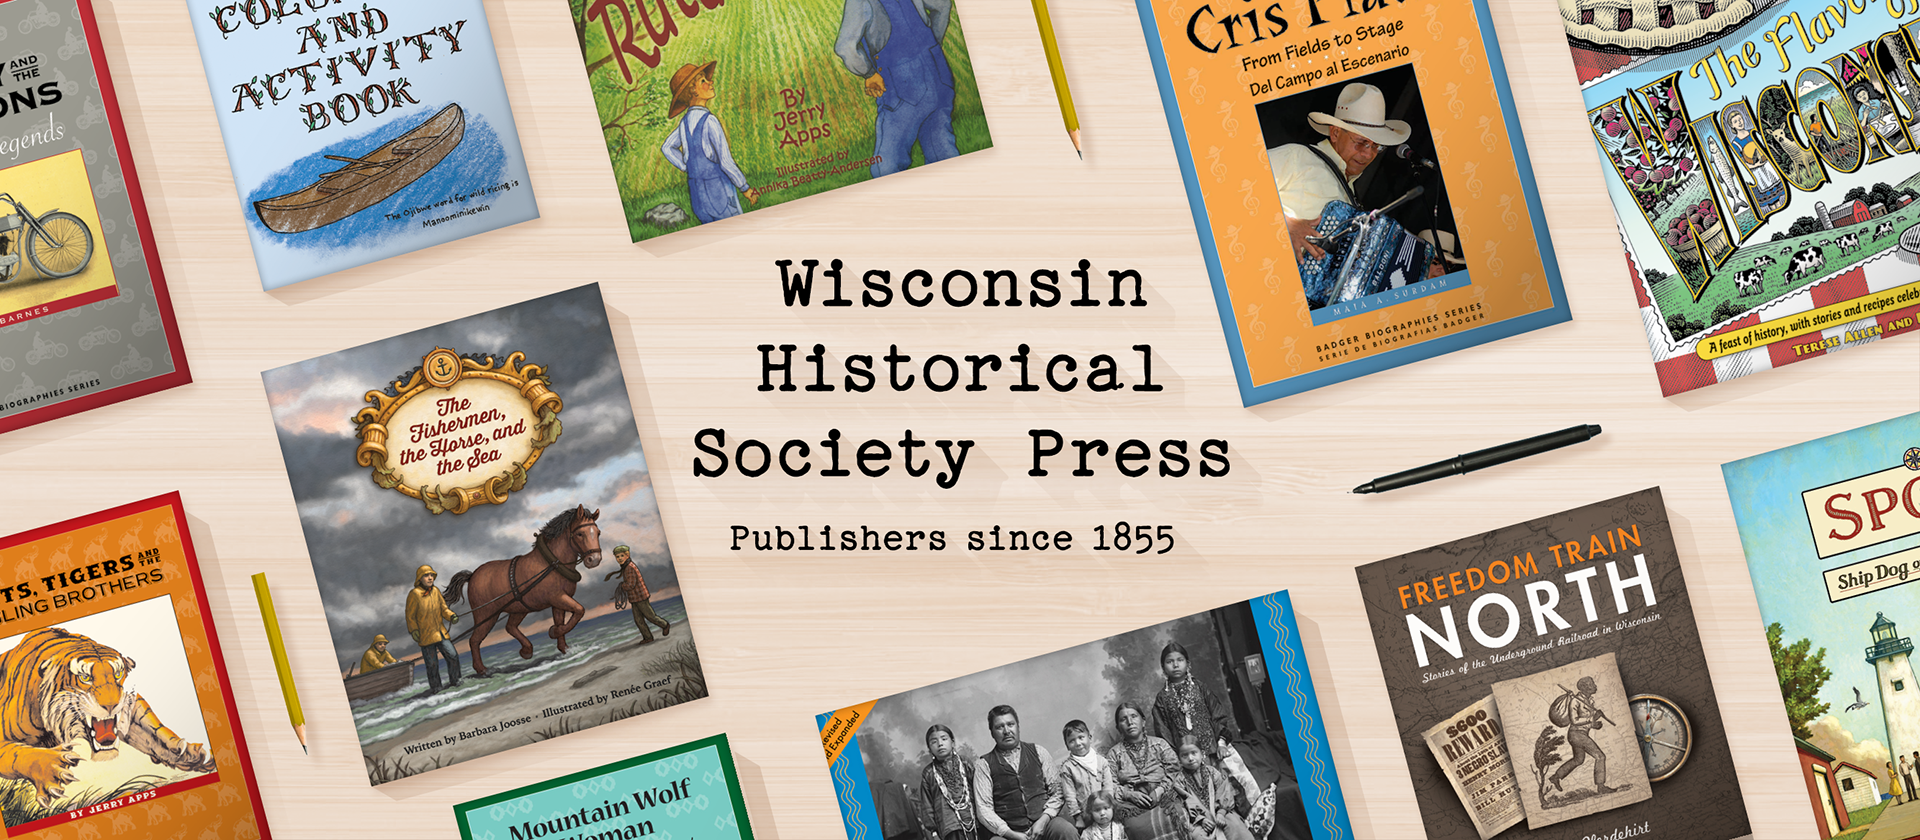 Wisconsin Historical Society Press - Publishers since 1855 - Kids' Activities Page 